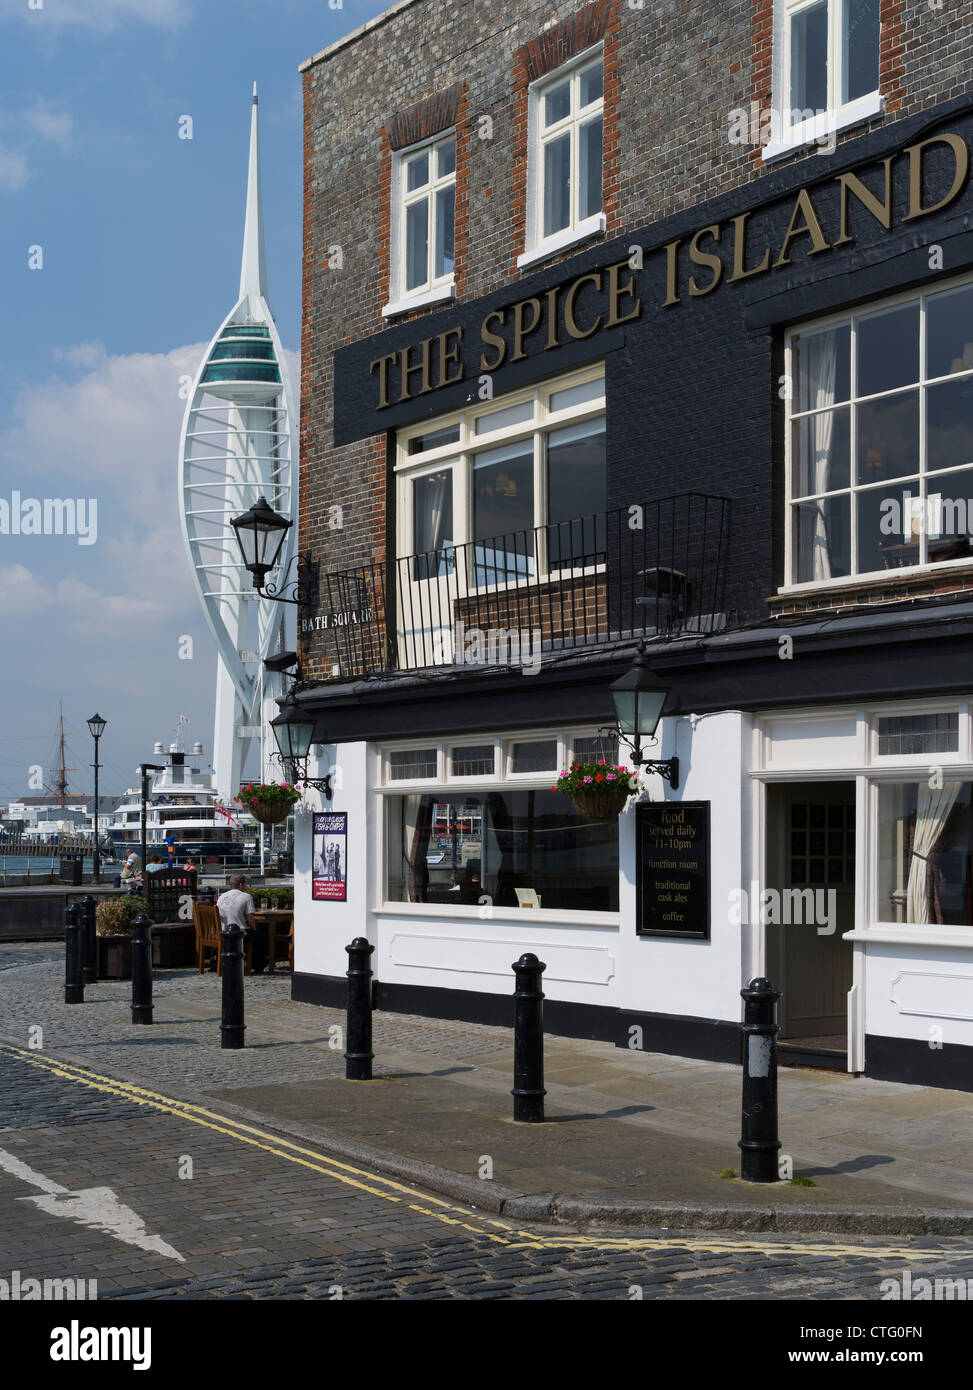 dh The Spice Island pub PORTSMOUTH OLD HAMPSHIRE ENGLAND Portsmouth Point peninsula Bath square traditional english pubs street front uk Stock Photo